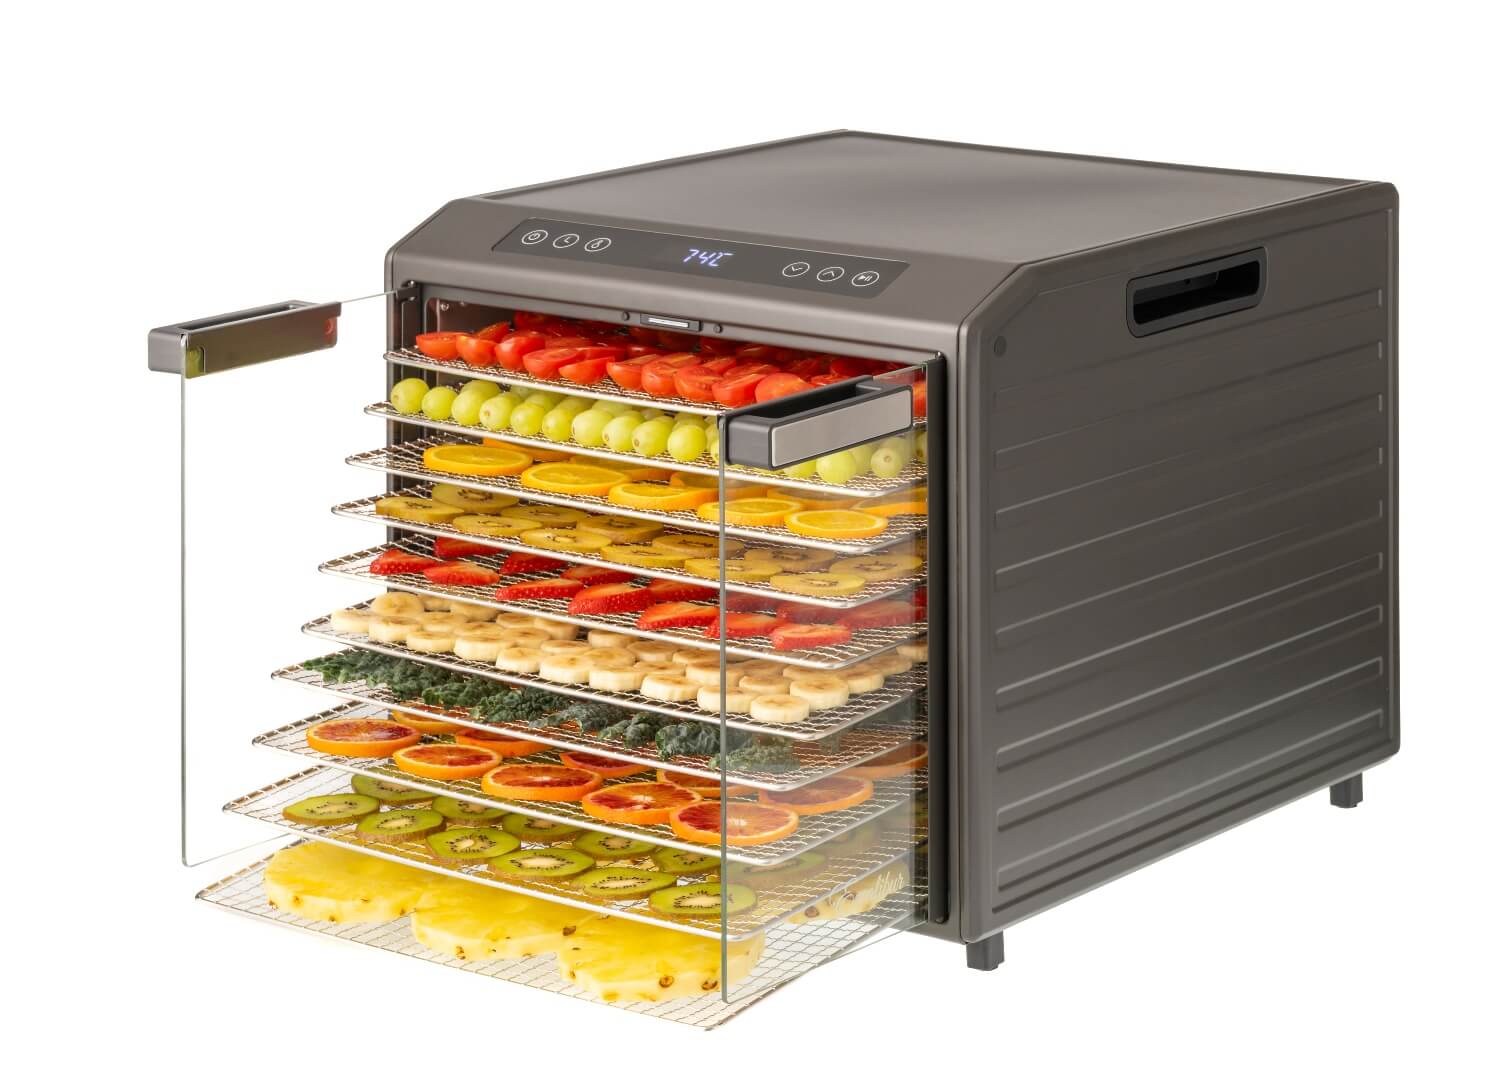 Excalibur 10 Tray Select Digital Dehydrator DH10SCSS13